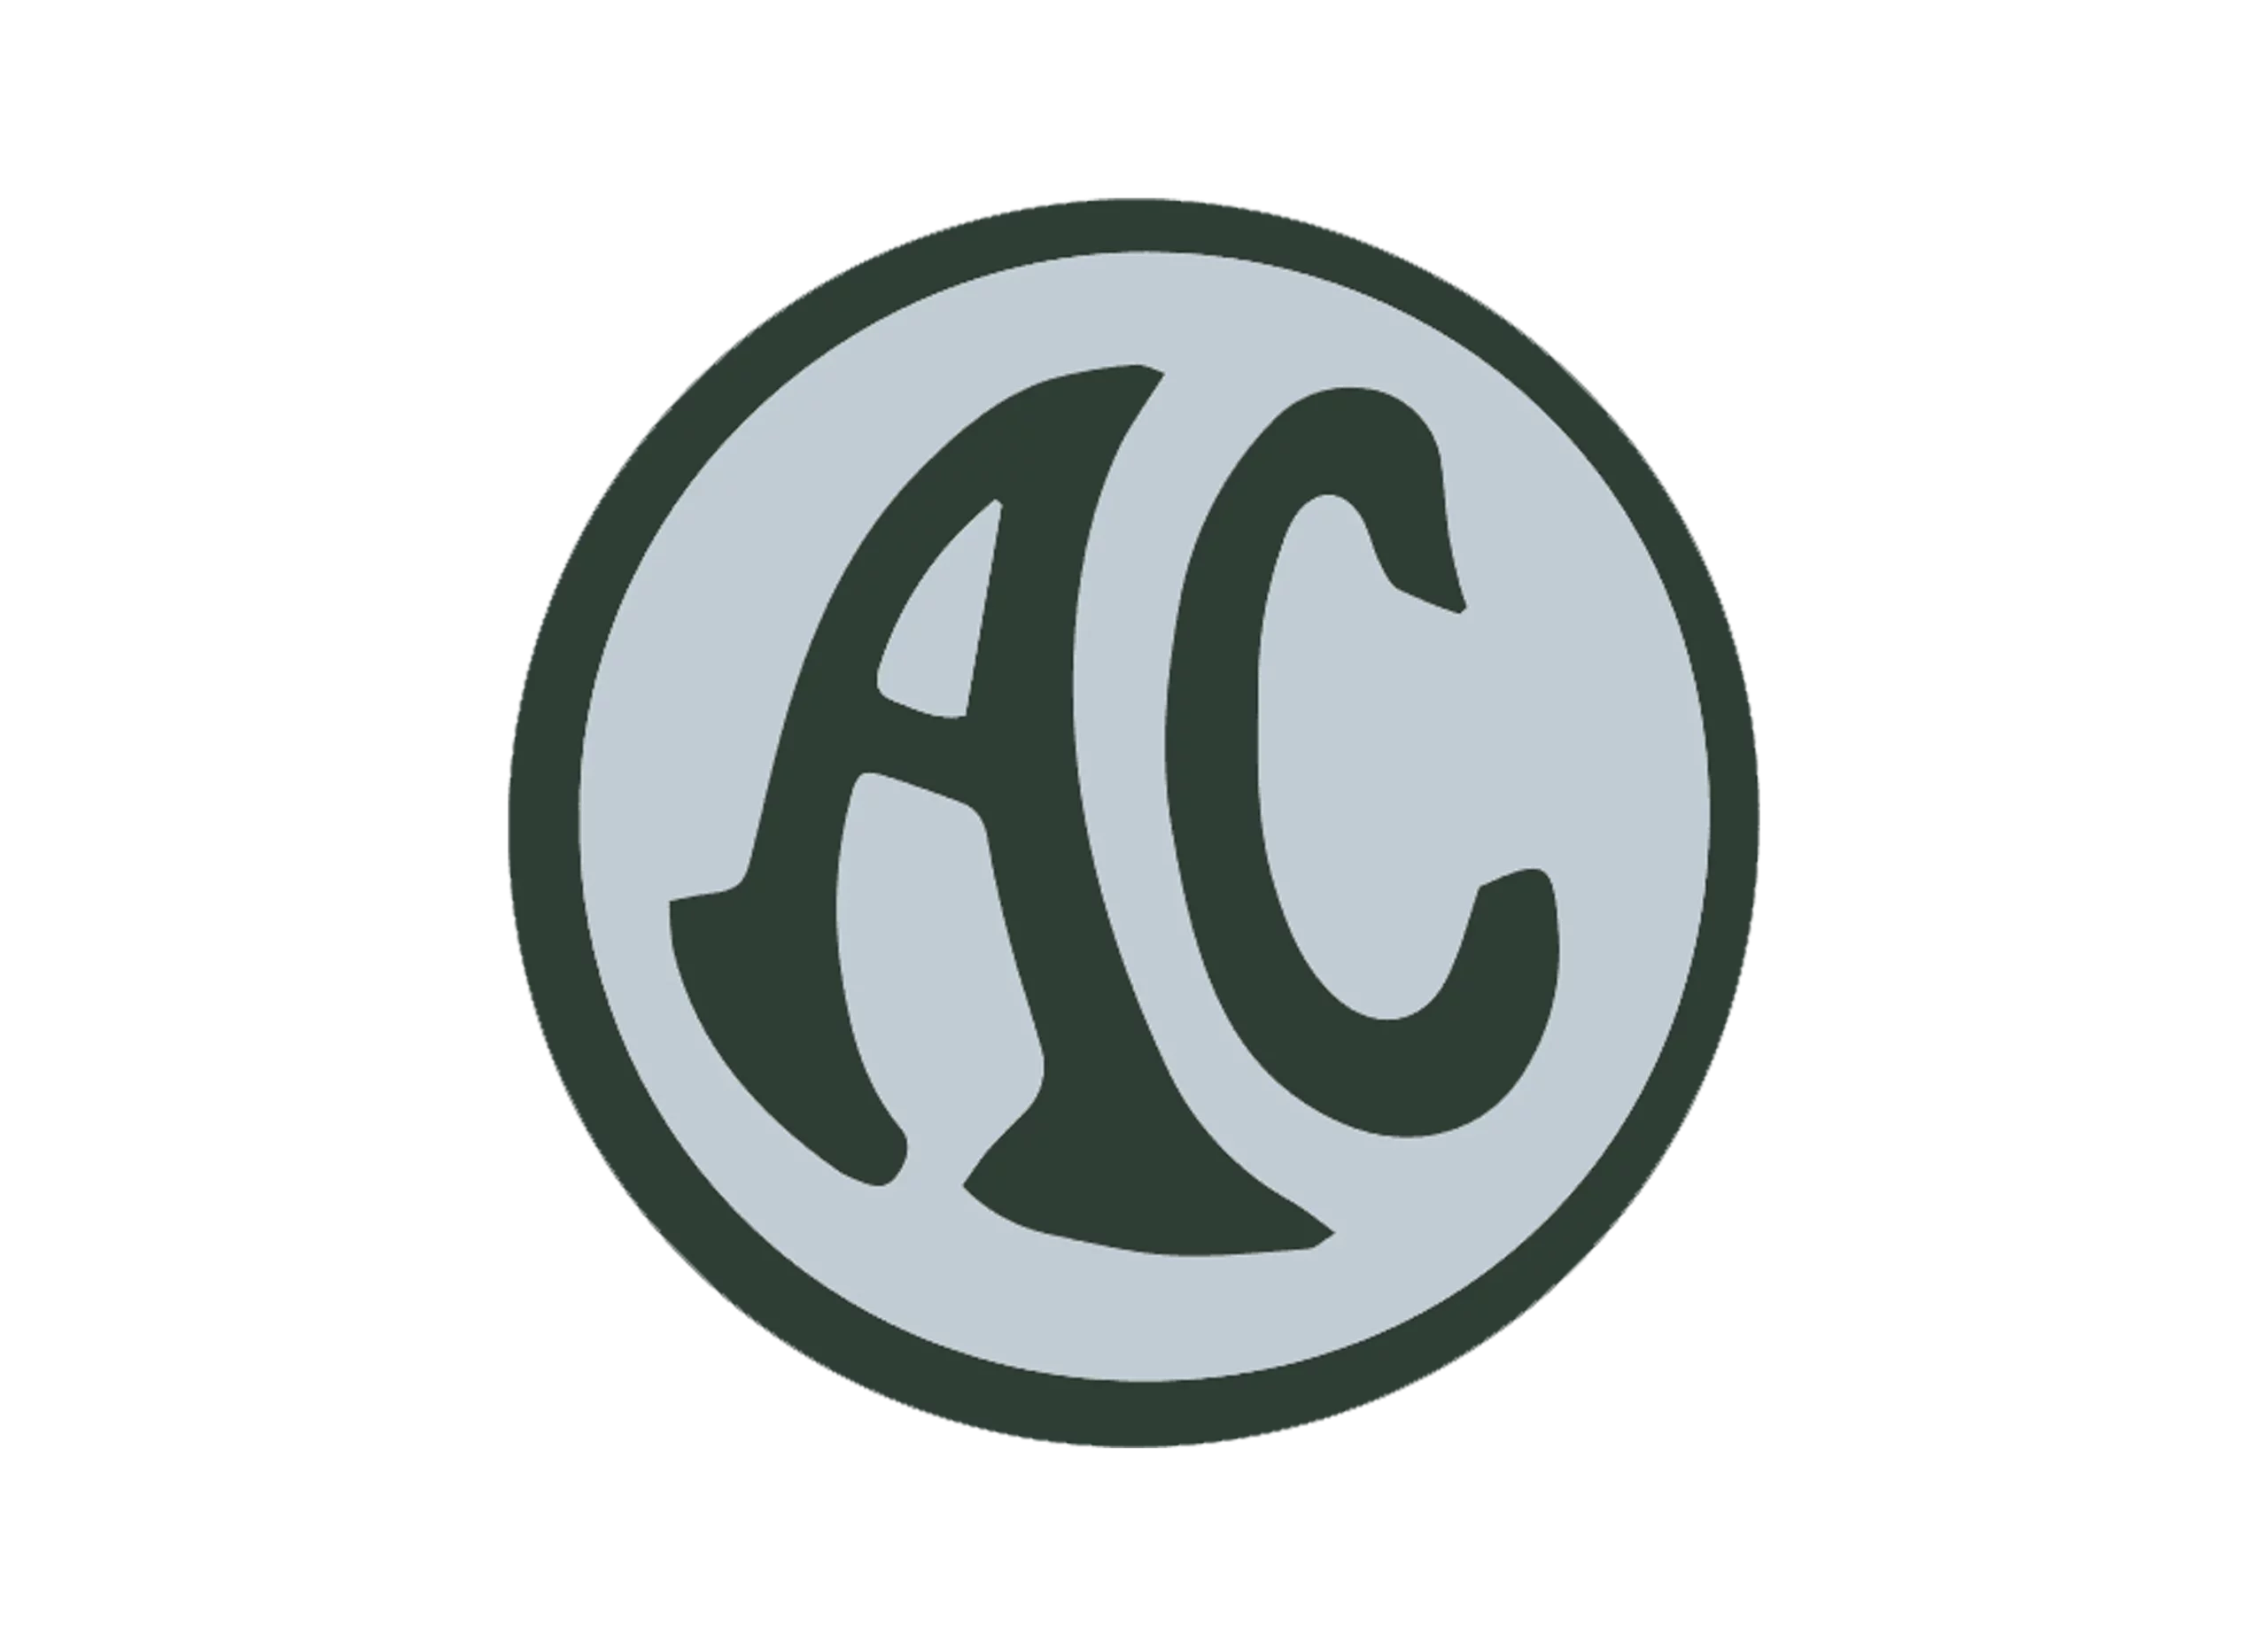 AC - Auto Carriers logo 1911-1996